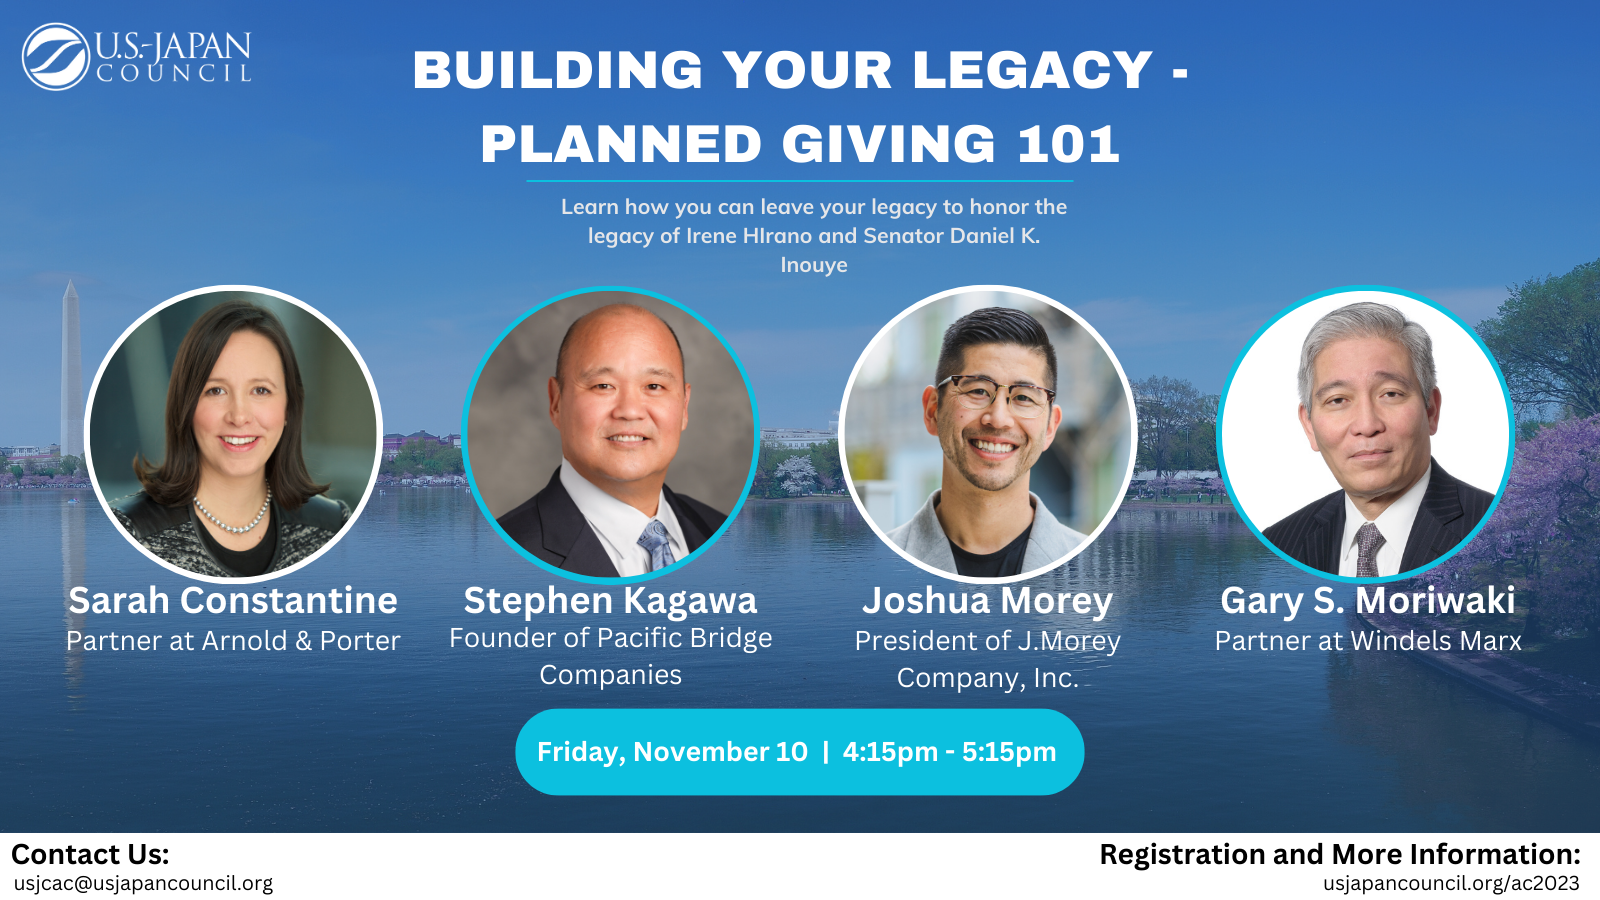 Building Your Legacy - Planned Giving 101 - U.S.-Japan Council